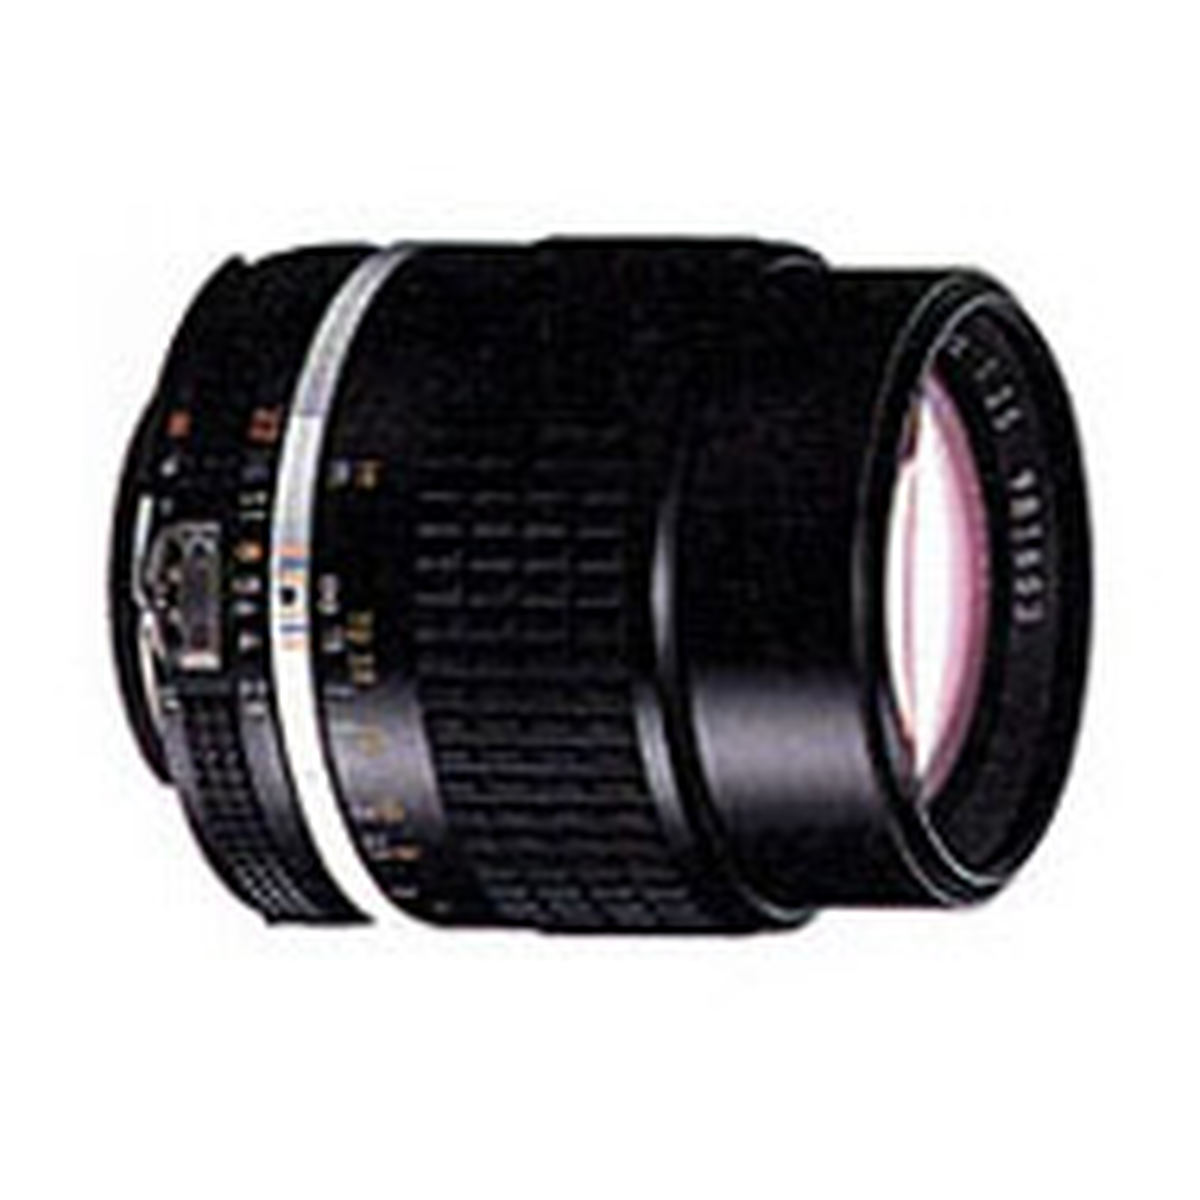 Nikon 105mm f/2.5 Ai-S : Specifications and Opinions | JuzaPhoto